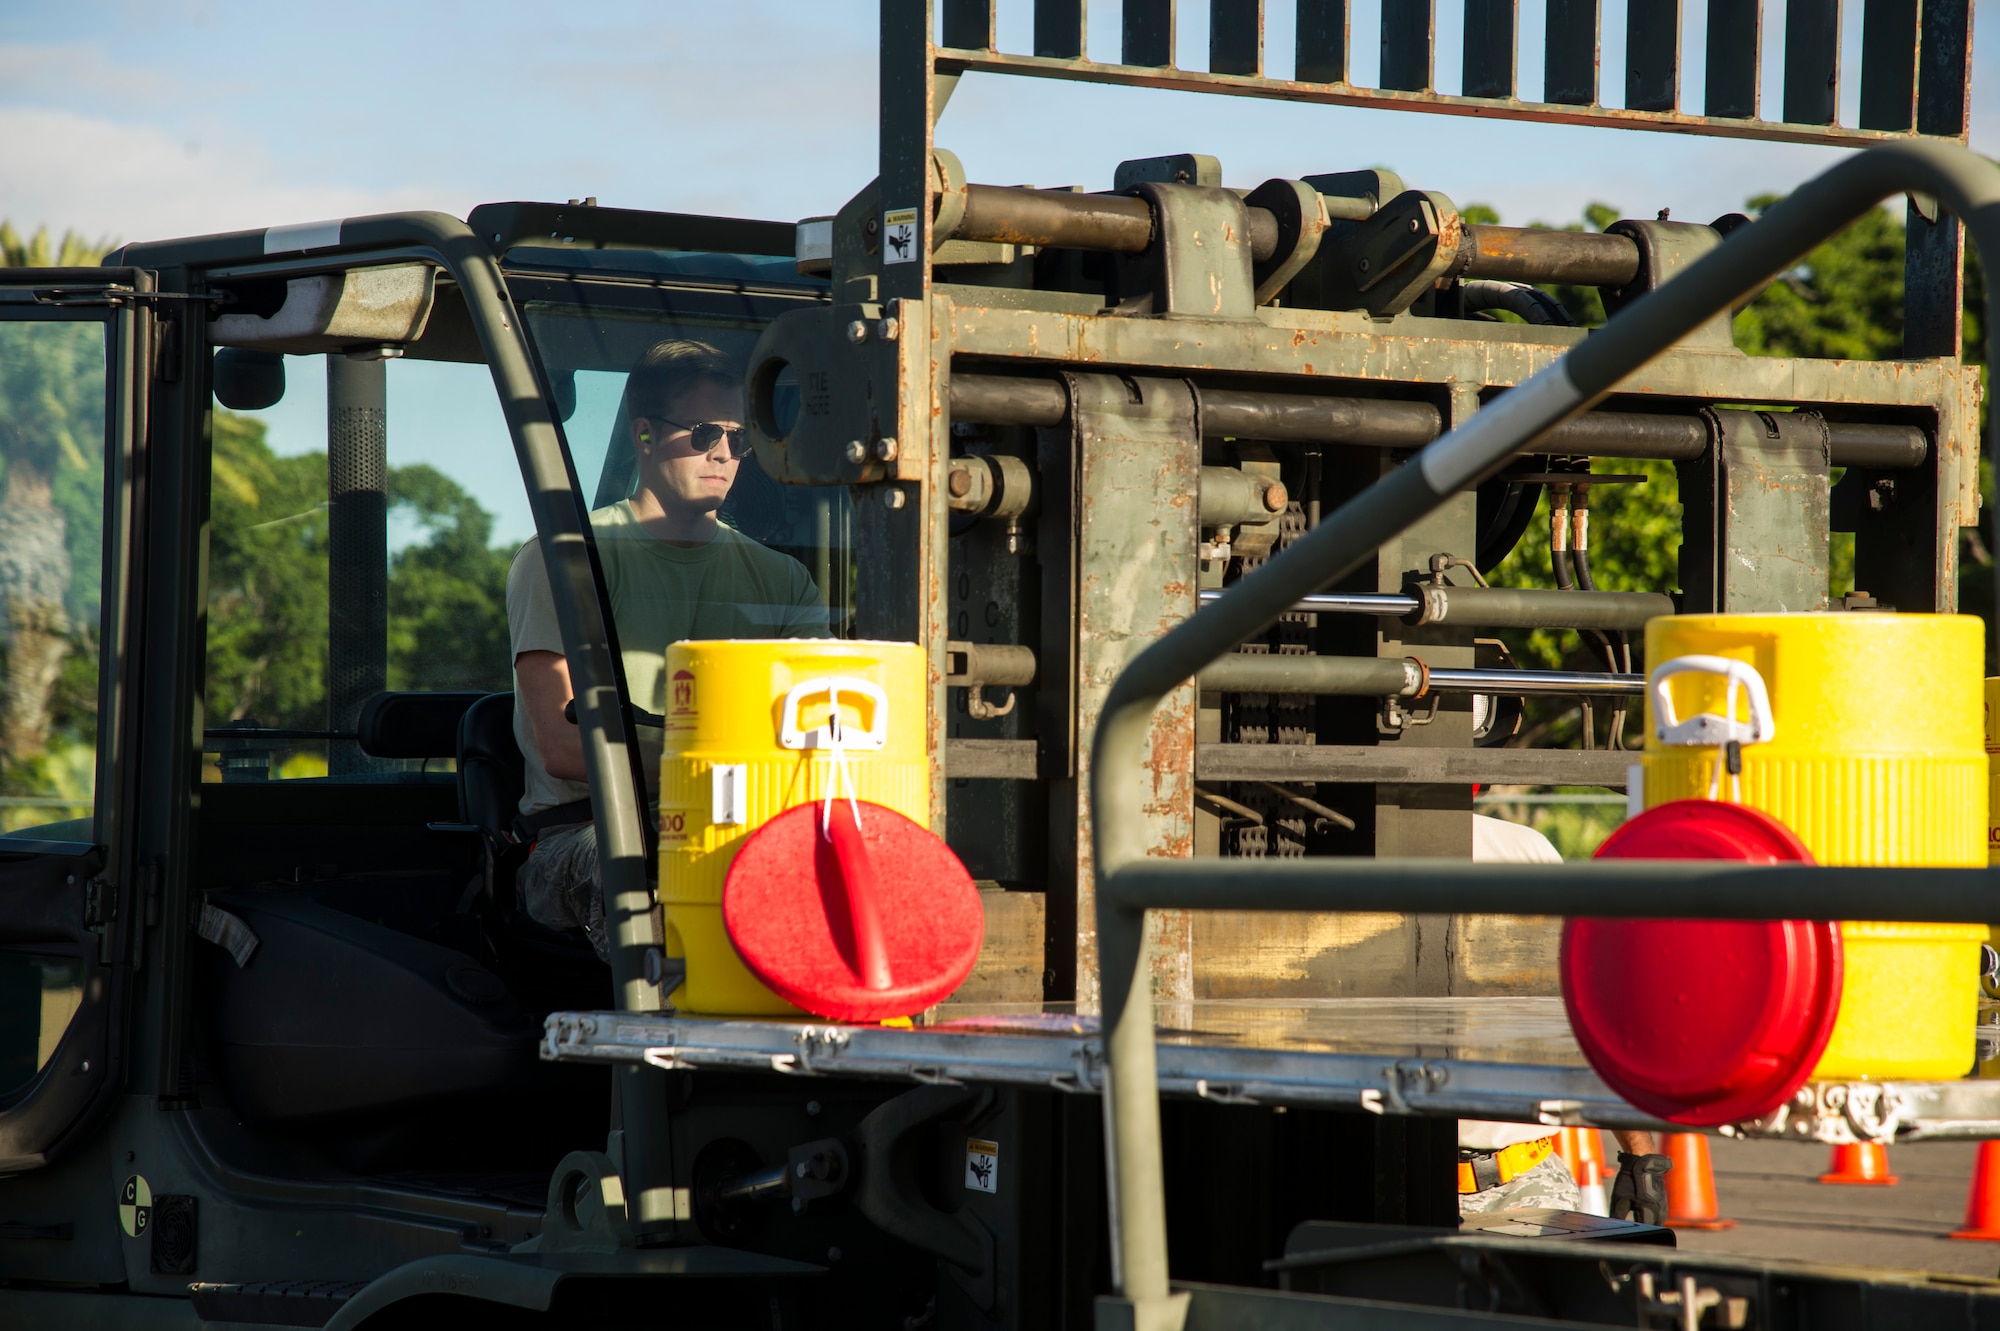 Senior Airman Ron Motz, 735th Air Mobility Squadron air freight journeyman, completes the second leg of the forklift obstacle during the Hickam Port Dawg Challenge, at Joint Base Pearl Harbor-Hickam, Hawaii, Nov. 17, 2017. The aerial port community hosts a Port Dawg Challenge every year to promote professionalism, and demonstrate air and space expeditionary force capabilities. (U.S. Air Force photo by Tech. Sgt. Heather Redman)